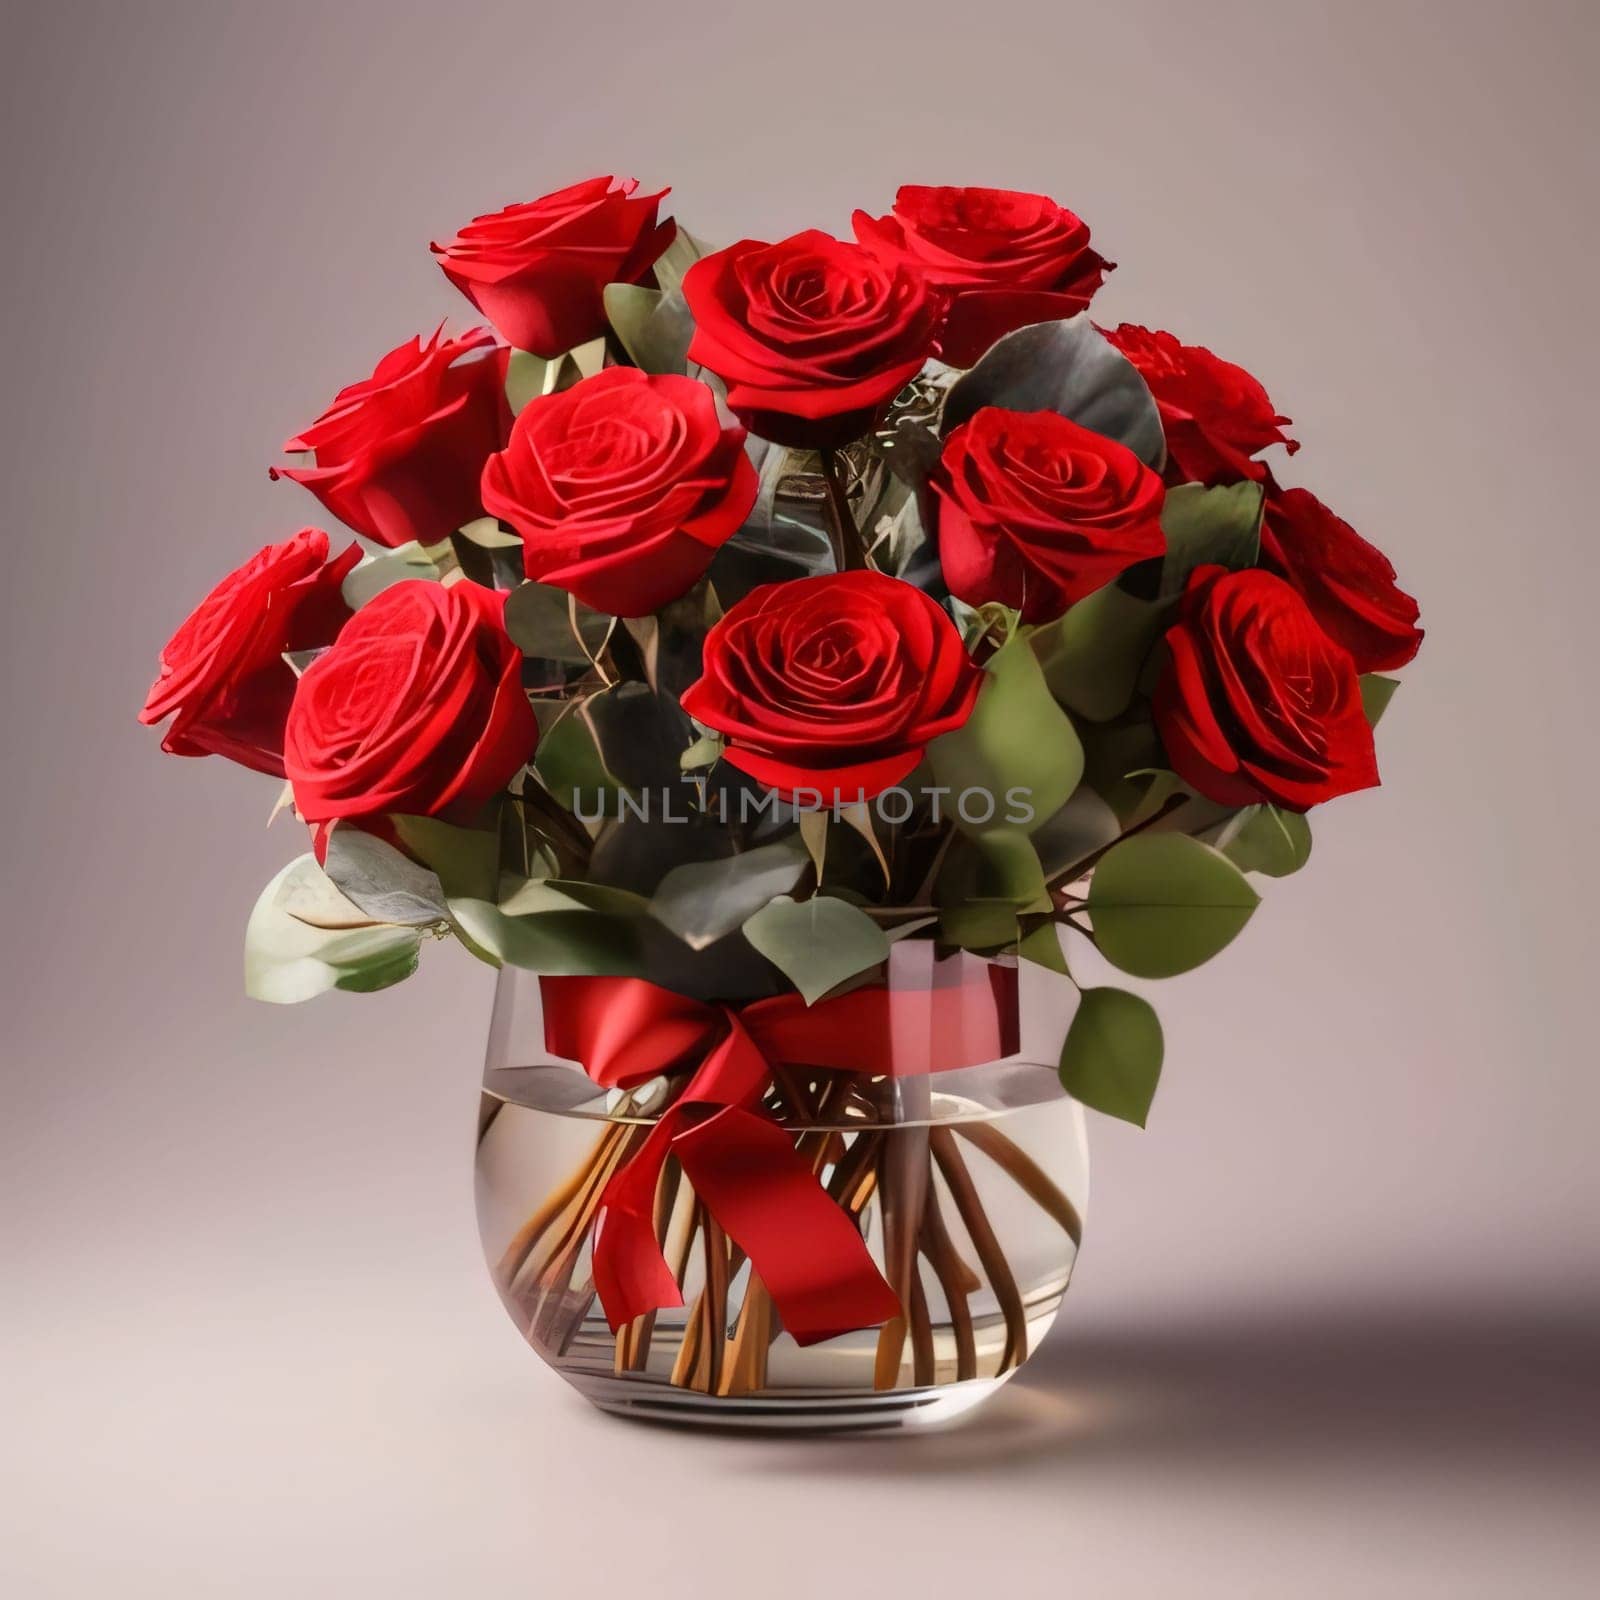 Bouquets of red roses with a red bow in a transparent vase, light background. Flowering flowers, a symbol of spring, new life. A joyful time of nature waking up to life.